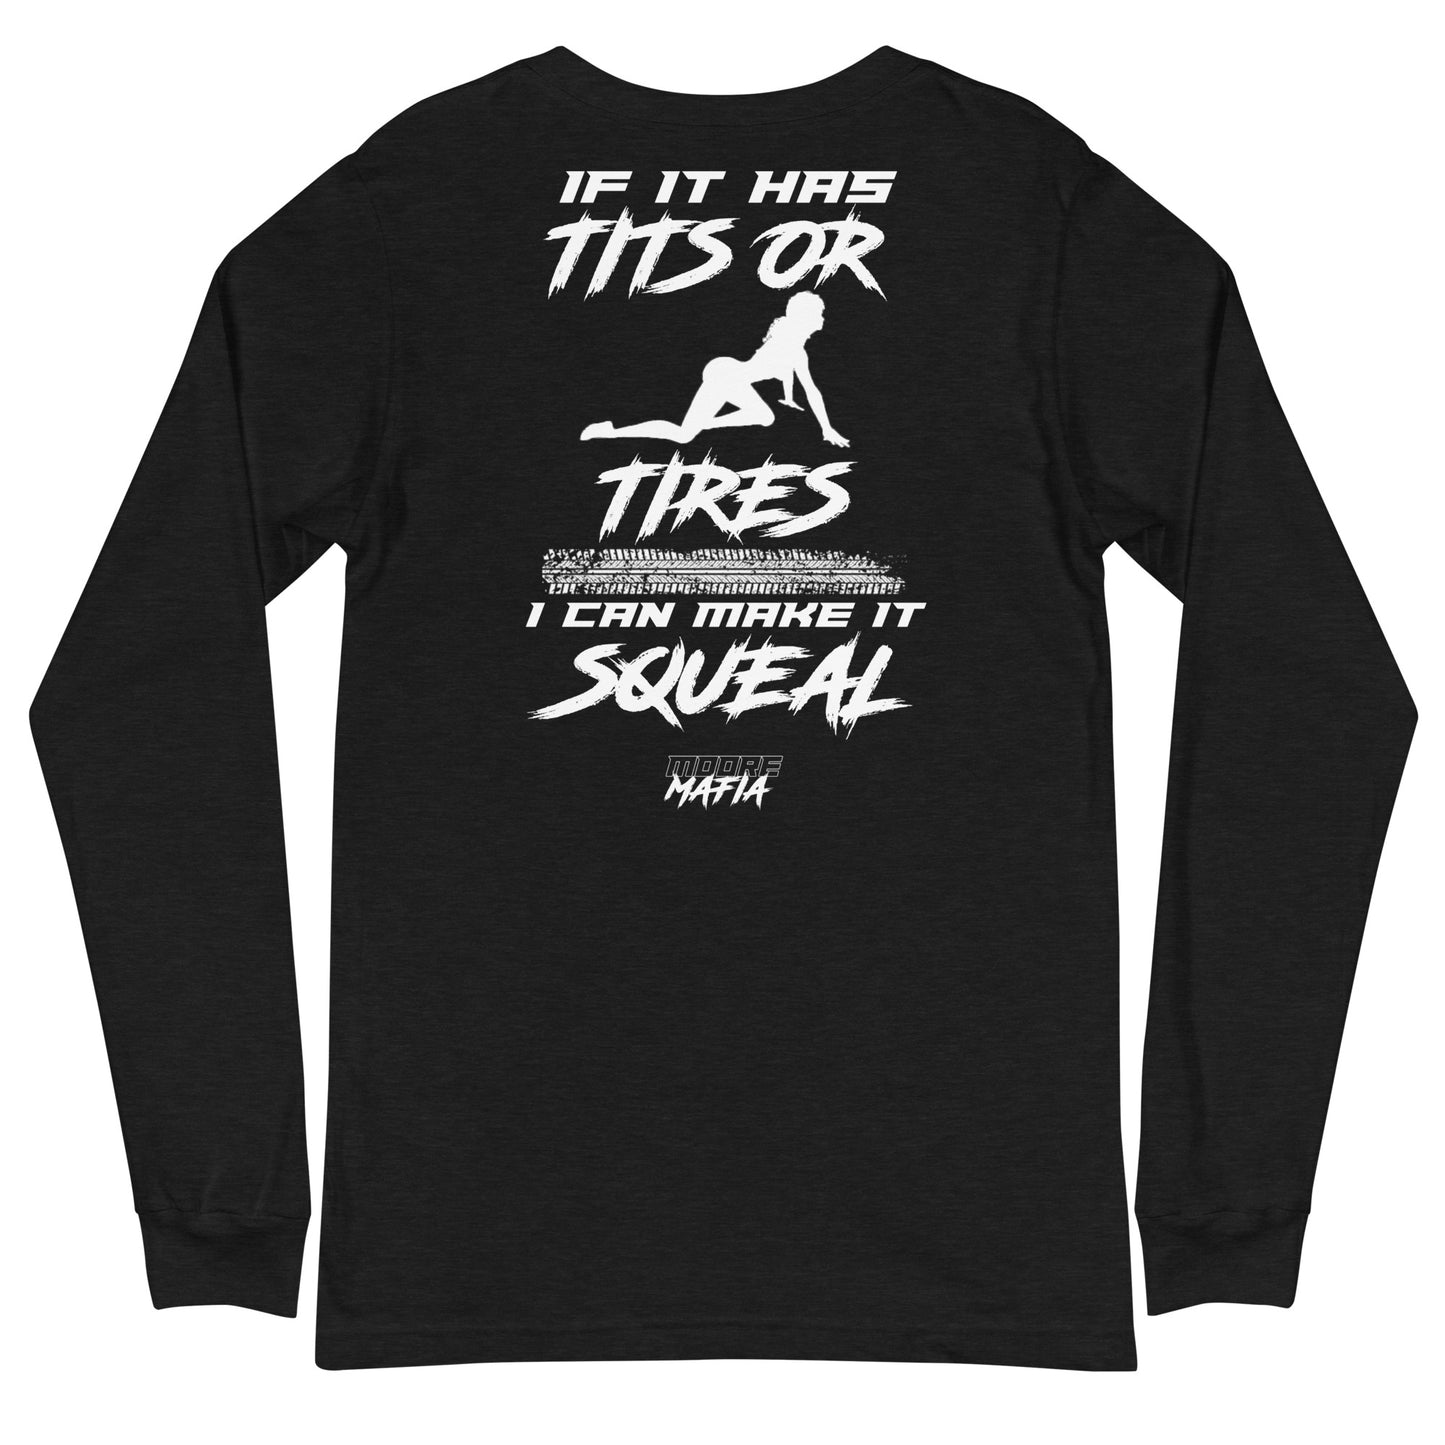 Tits Or Tires Unisex Long Sleeve Tee